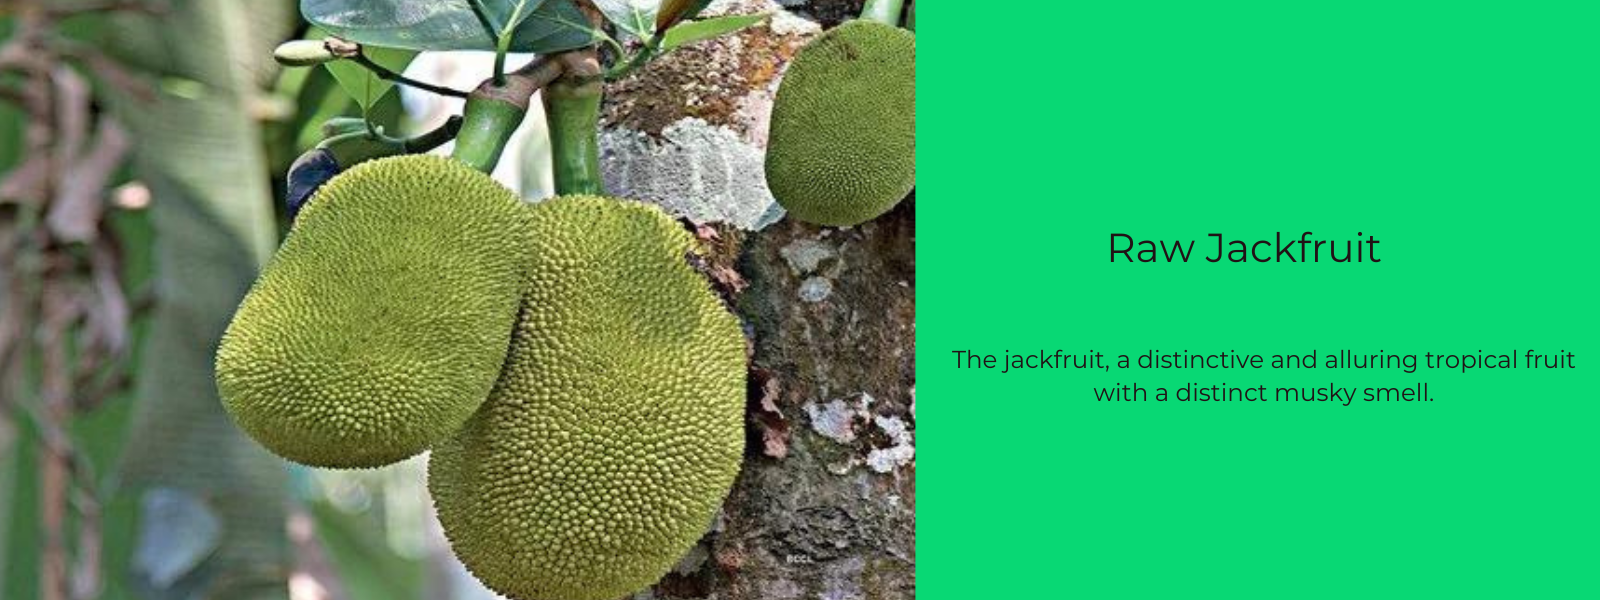 Raw Jackfruit – Health Benefits, Uses and Important Facts